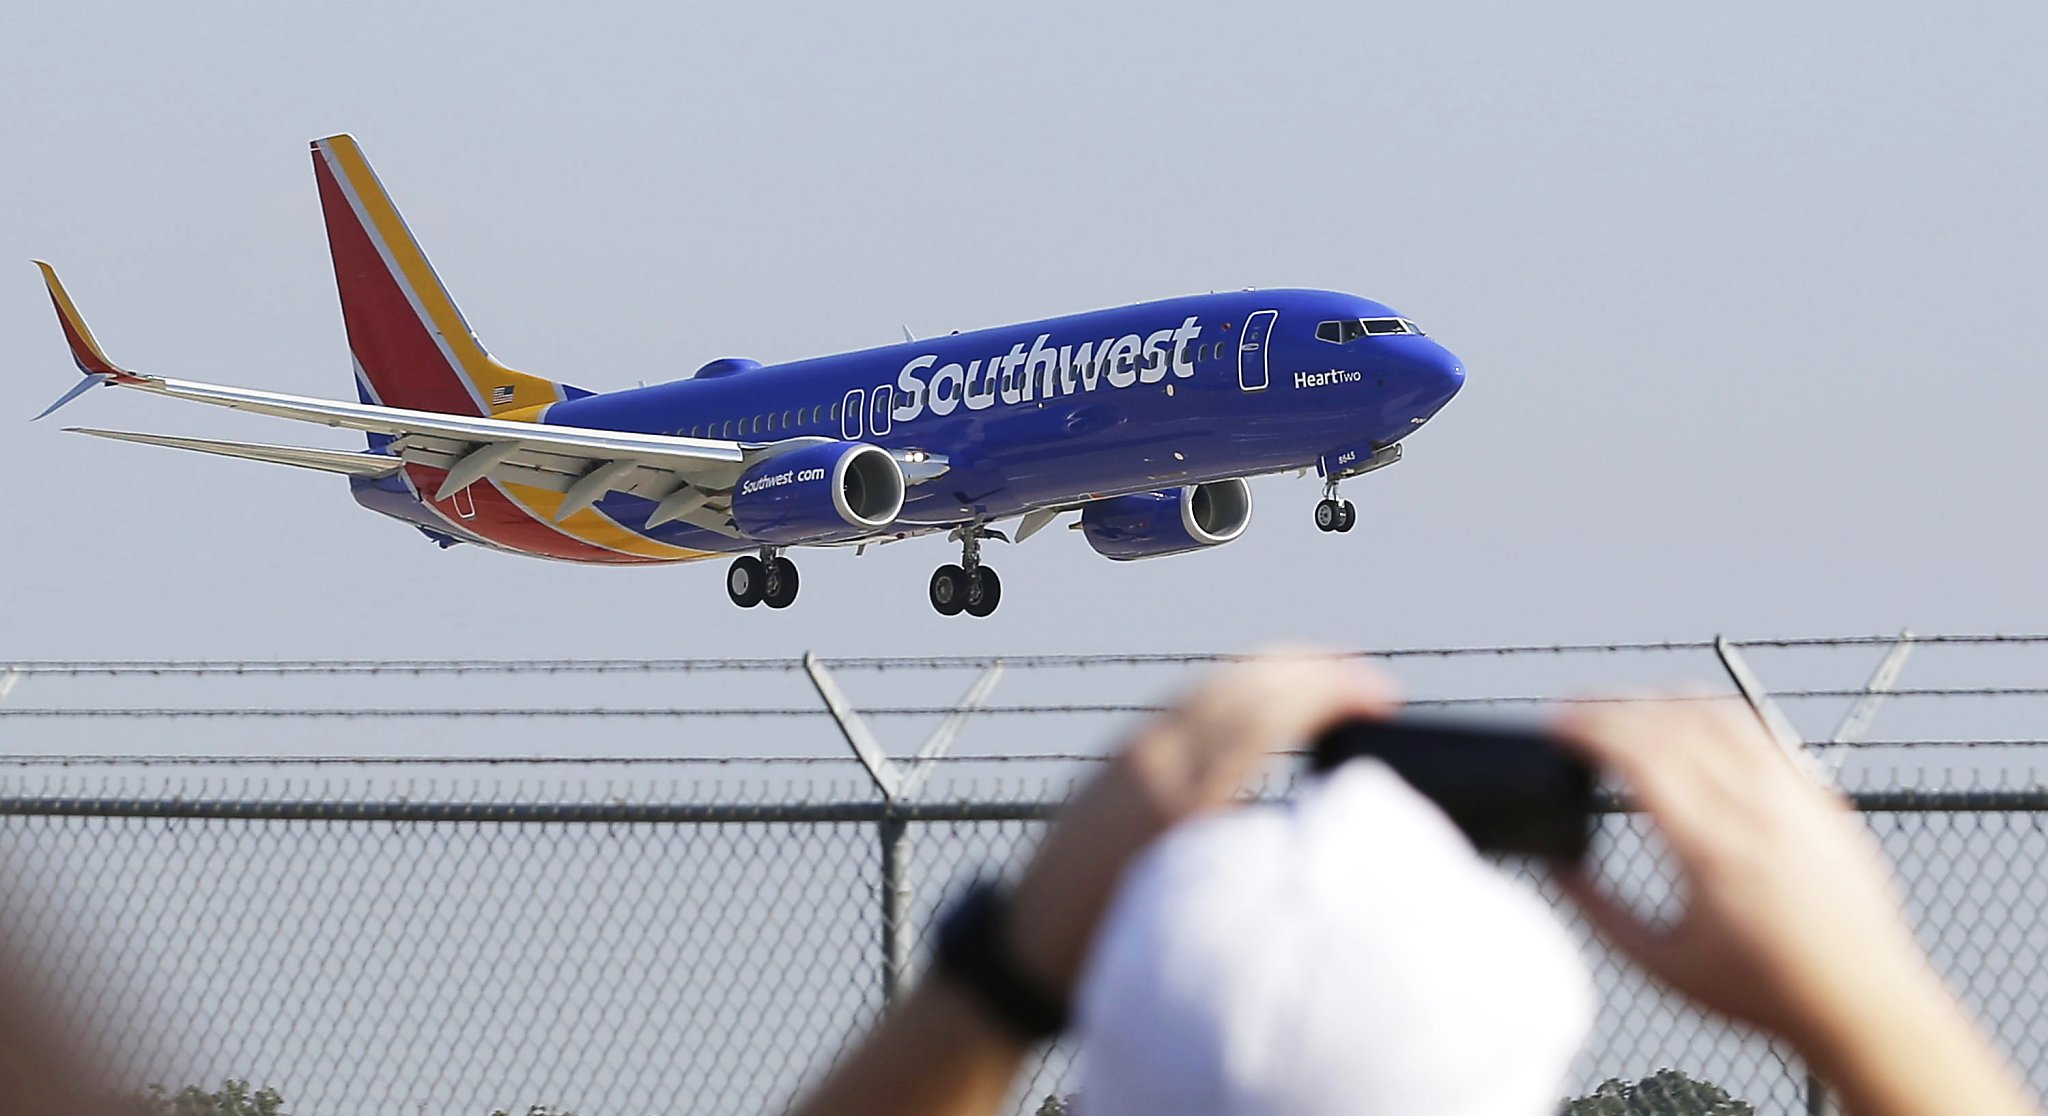 Southwest Airlines Introduces a Significant Improvement to In-Flight Safety